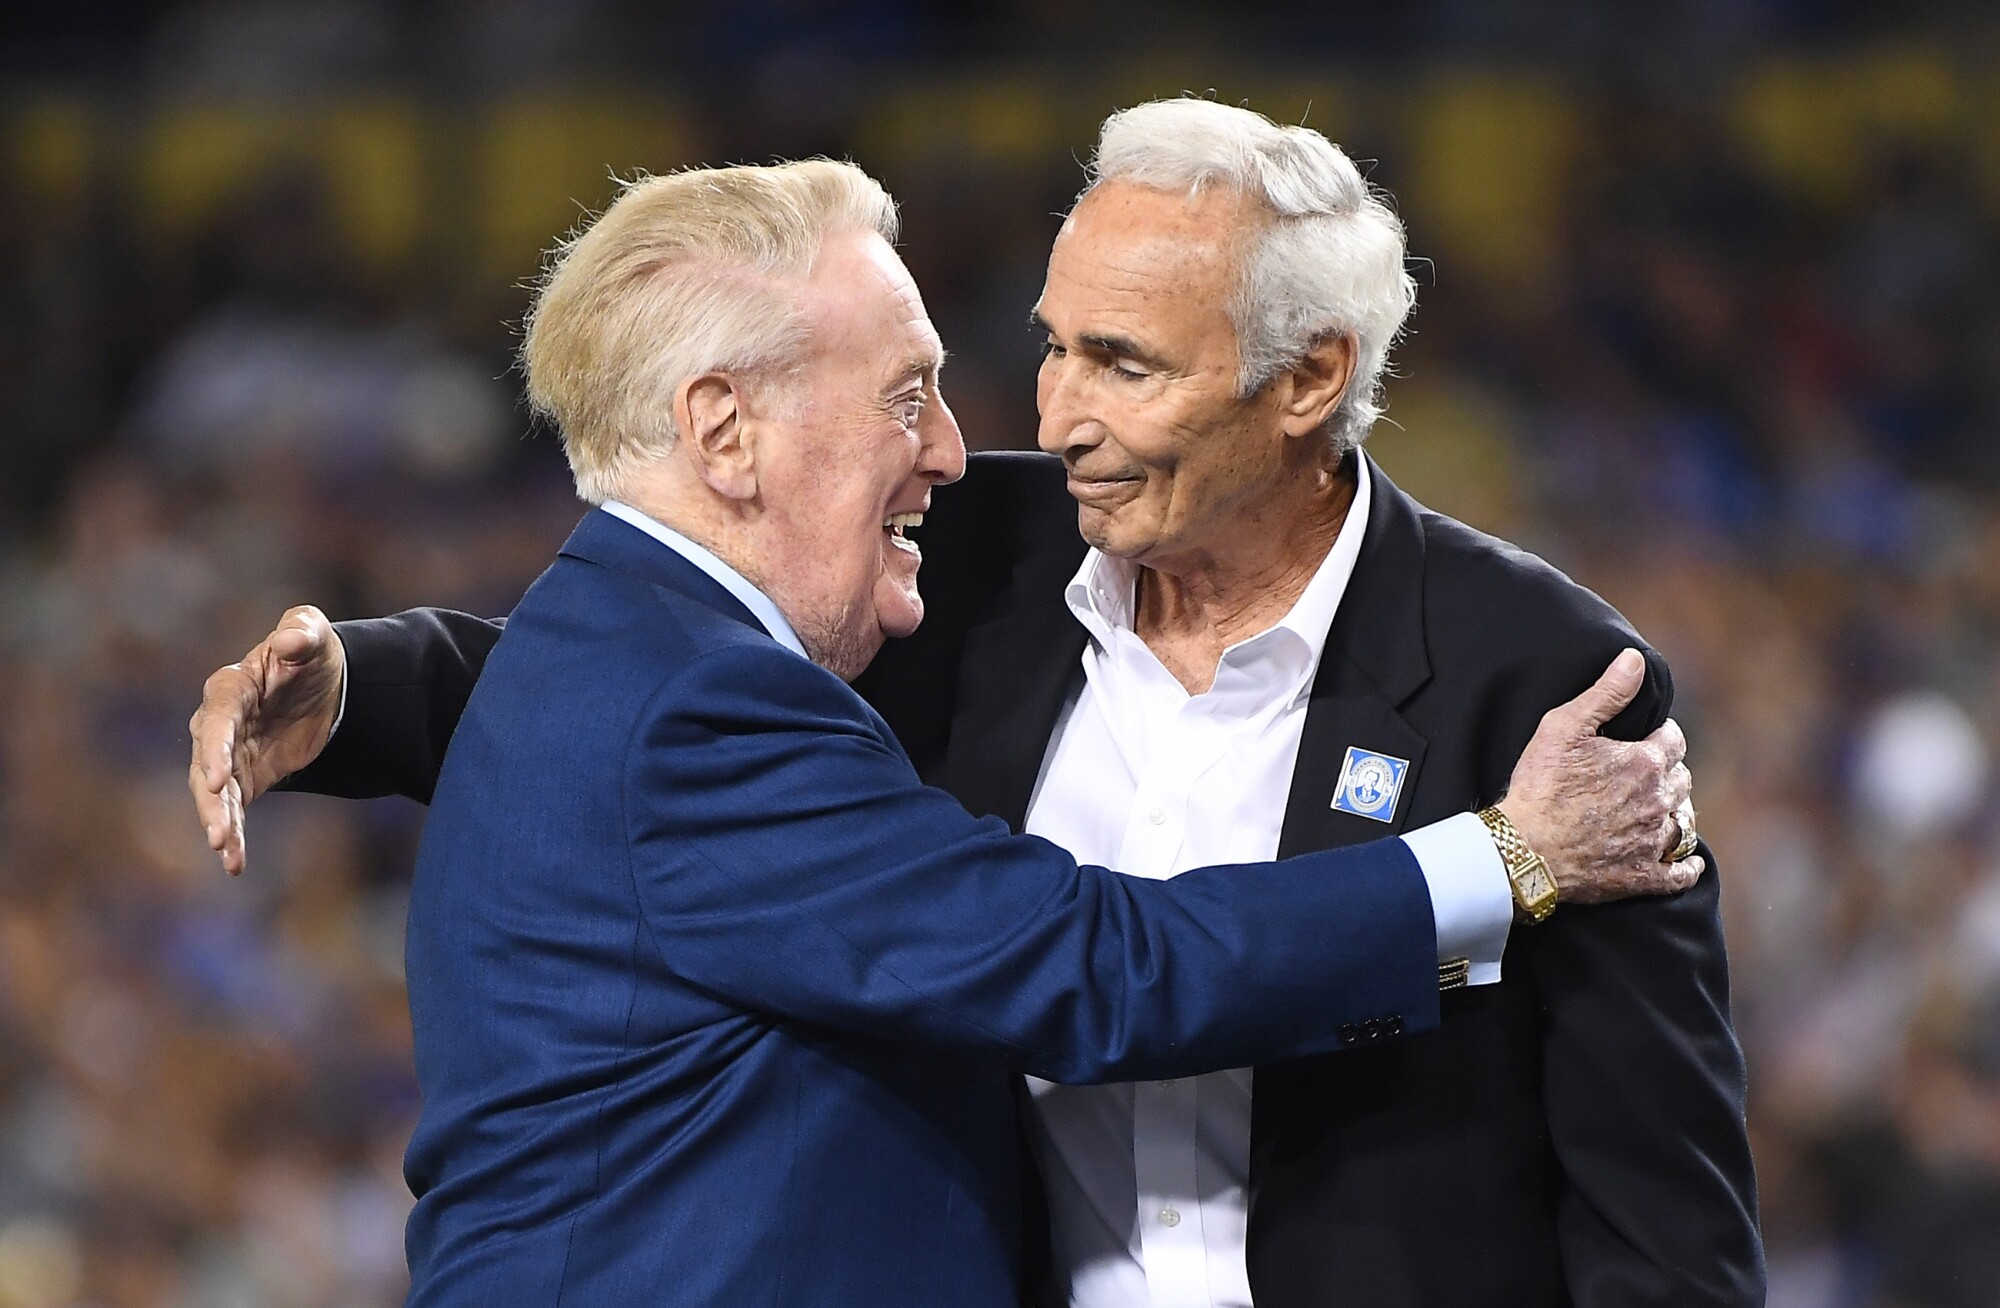 Dodgers shortstop Vin Scully hugs former pitcher Sandy Koufax at the Vin Scully Appreciation Night.